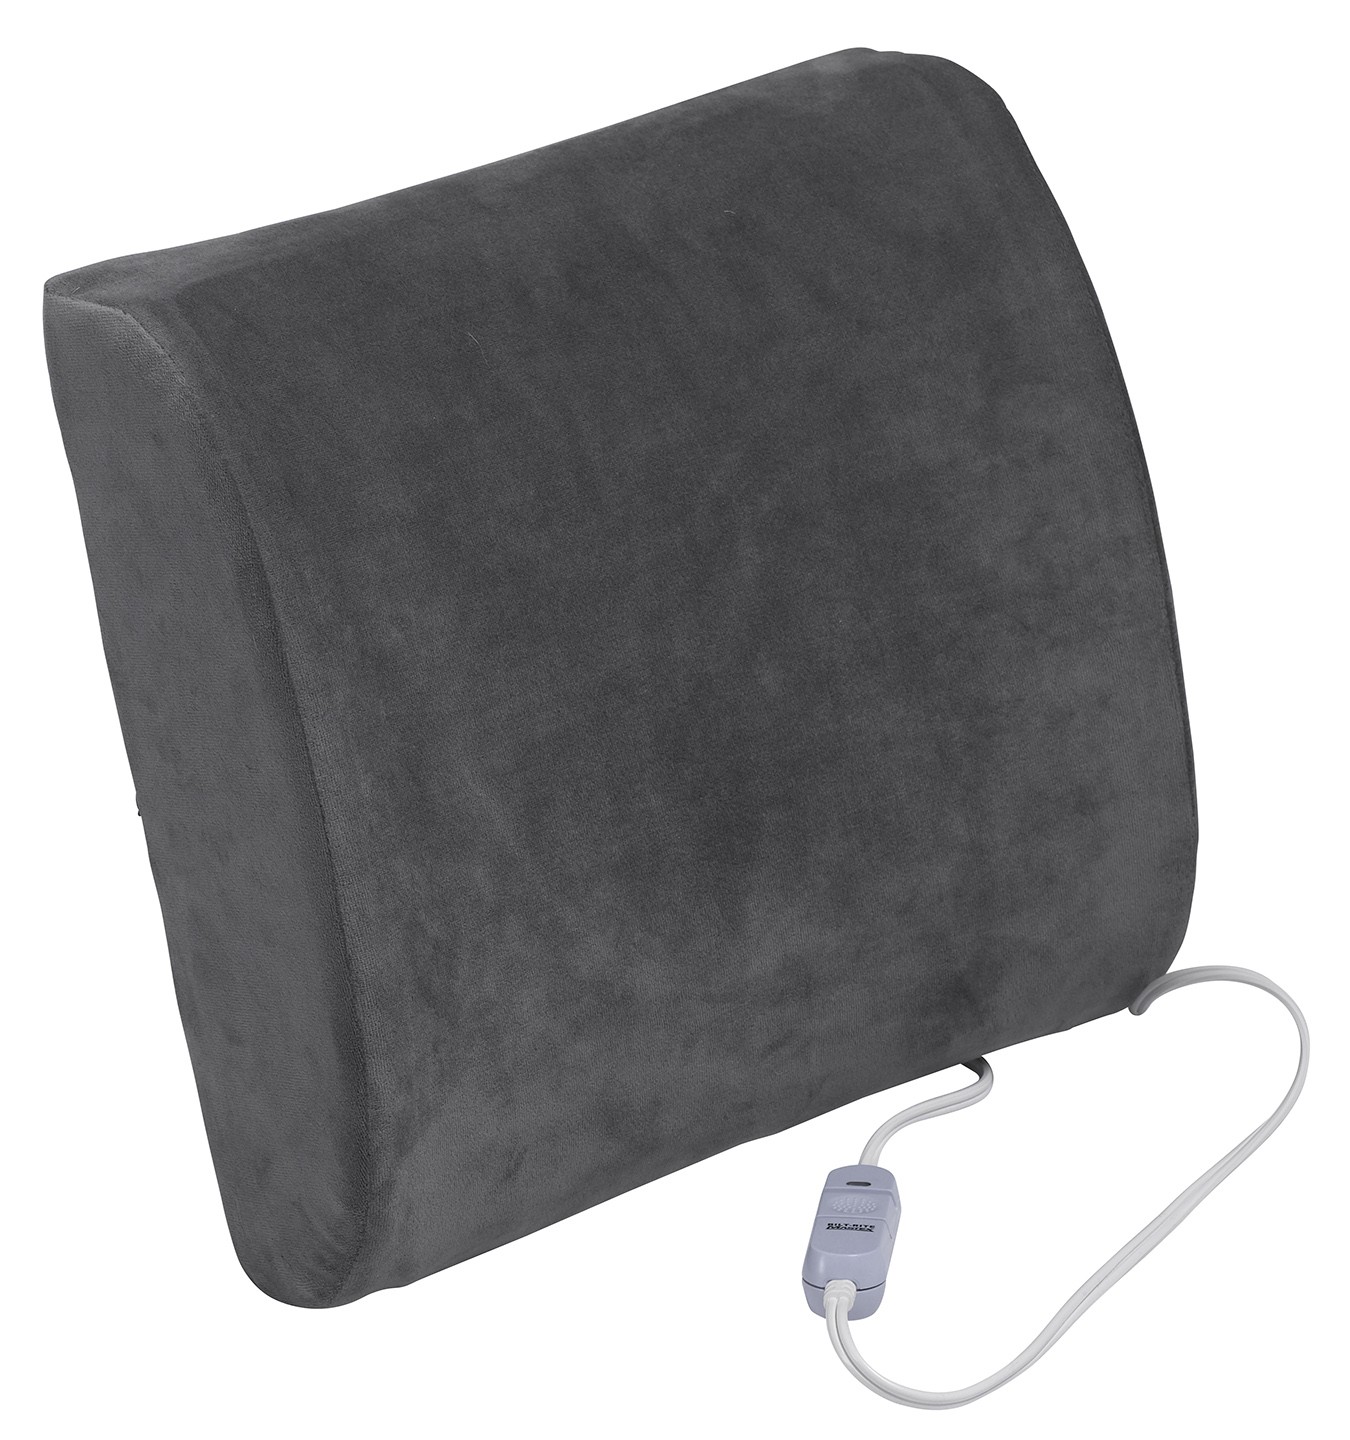 Memory Foam Seat Cushion with Lumbar Support - Light Gray